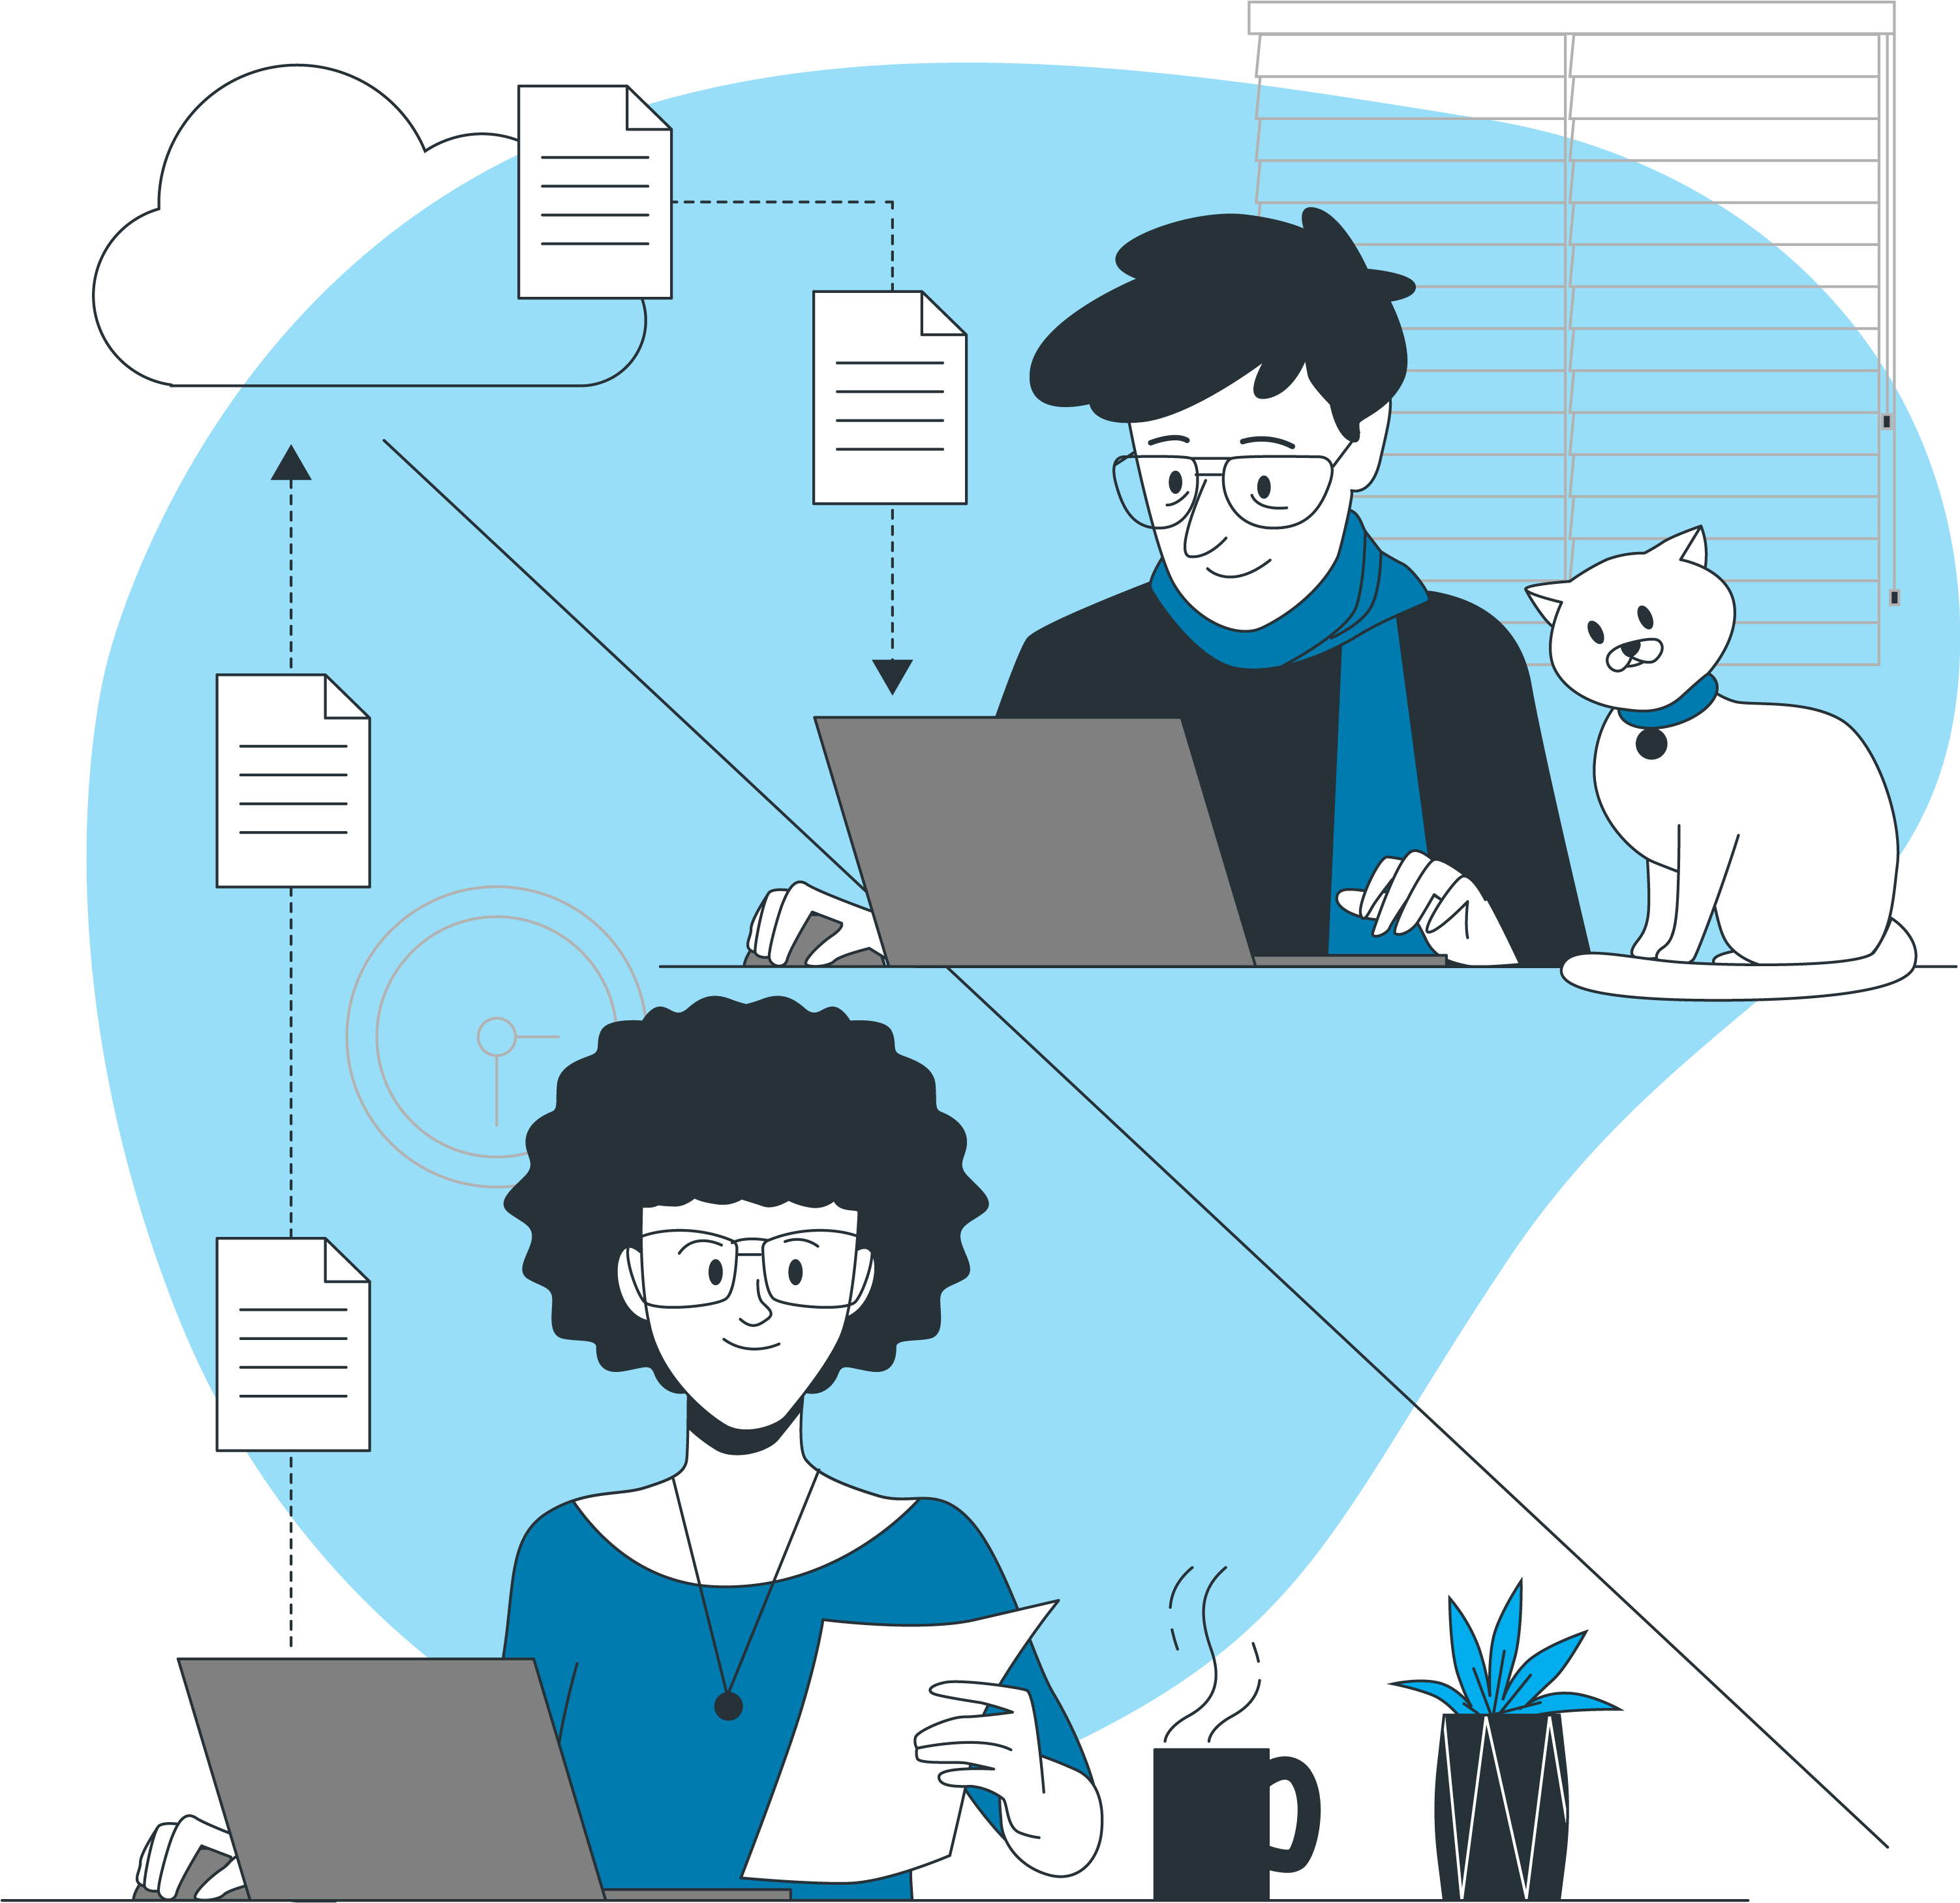 Illustration of woman reading a document and man with cat looking at a laptop.